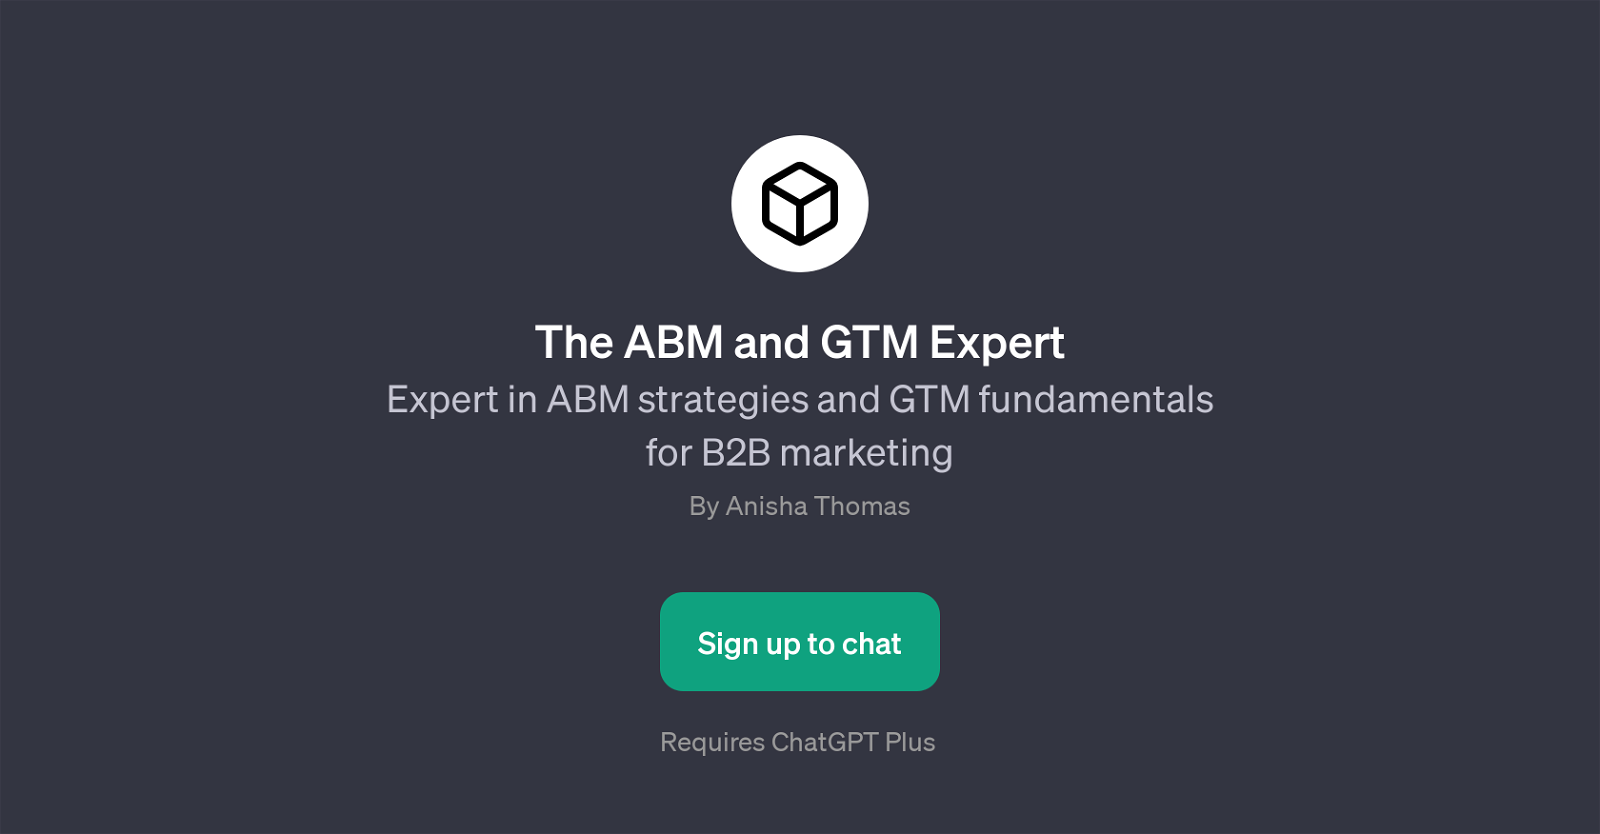 The ABM and GTM Expert website